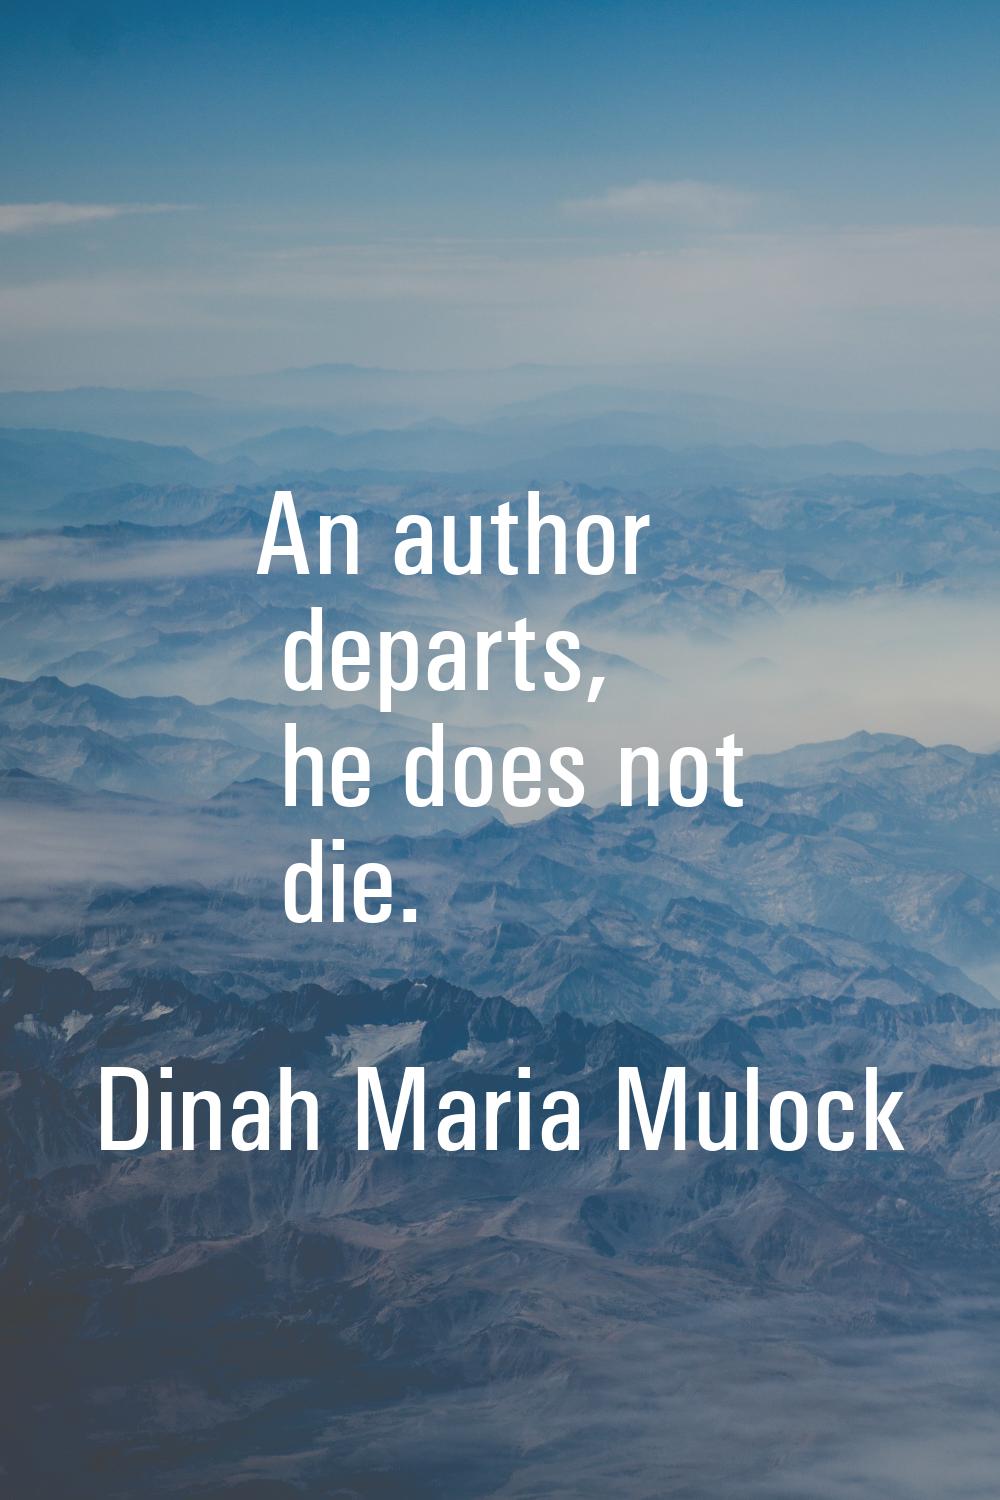 An author departs, he does not die.